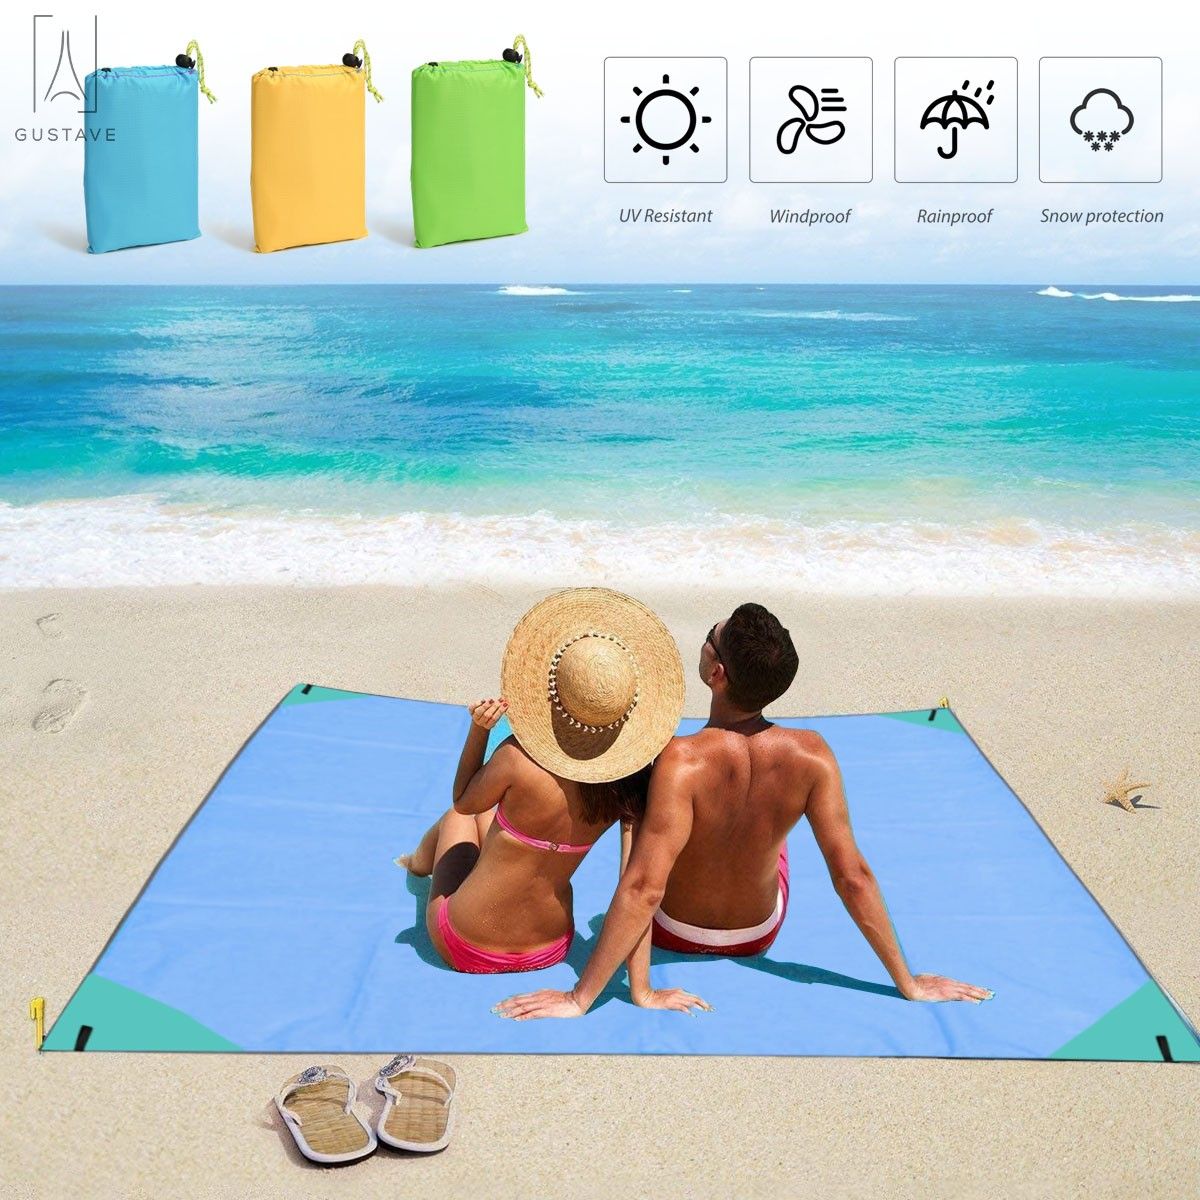 Gustave Beach Blanket Picnic Mat Camping Ground Mat Mattress Outdoor Blanket Waterproof Sandproof Beach Mat Portable Picnic Blanket with 4 Stakes & Carry Bag "Yellow" - image 2 of 9